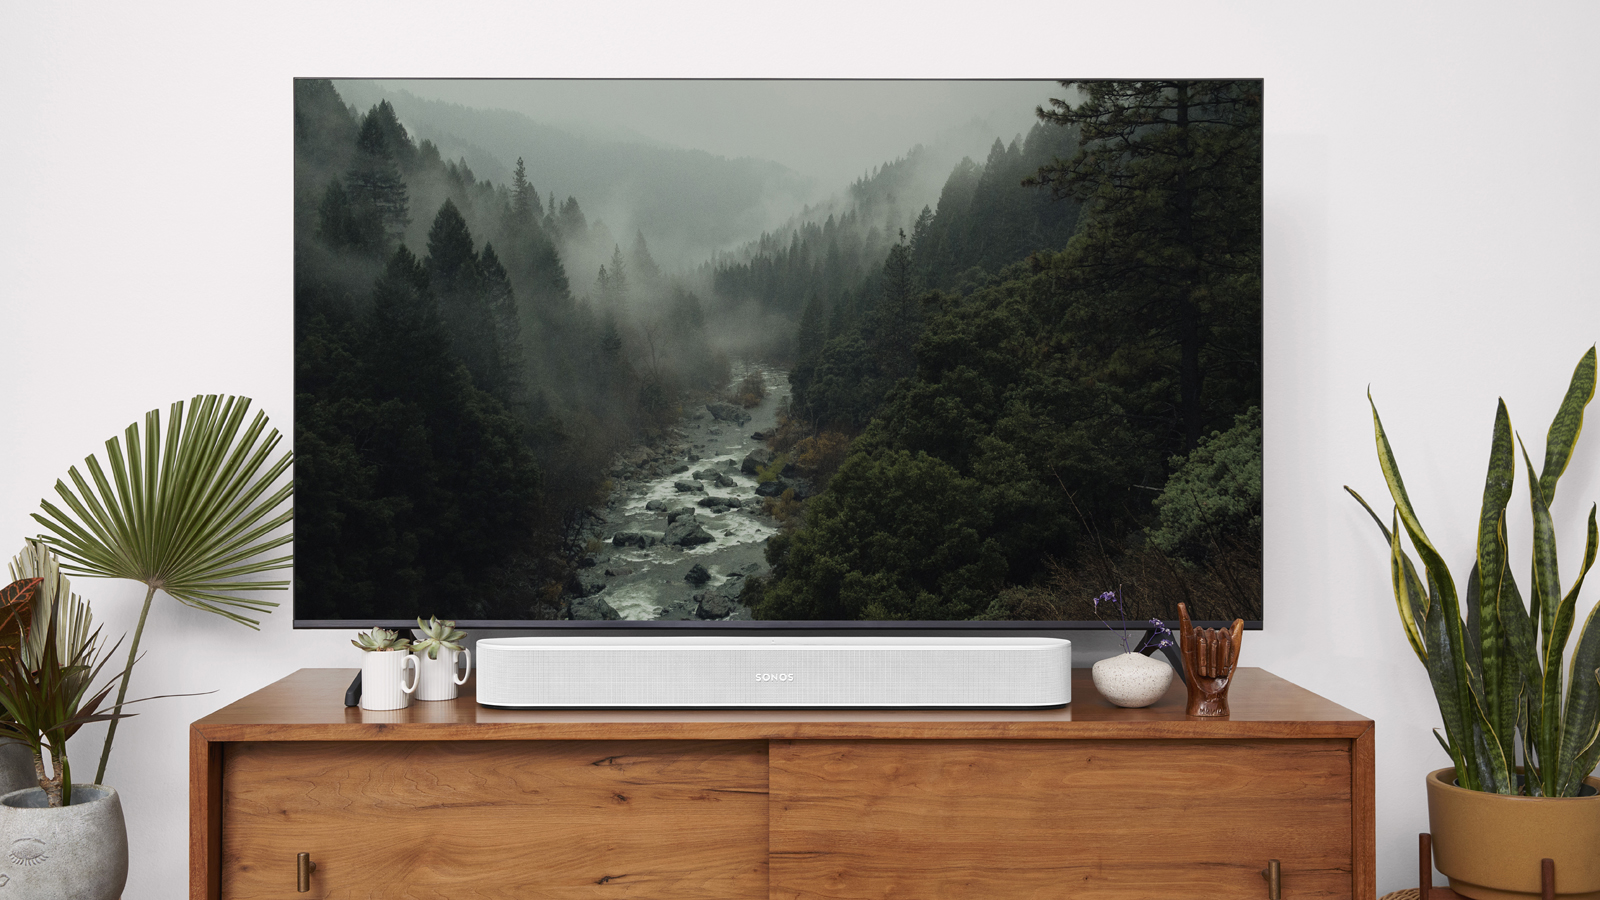 censur komfort omvendt New Sonos Beam brings Sonos Arc's best parts without the high price tag |  TechRadar